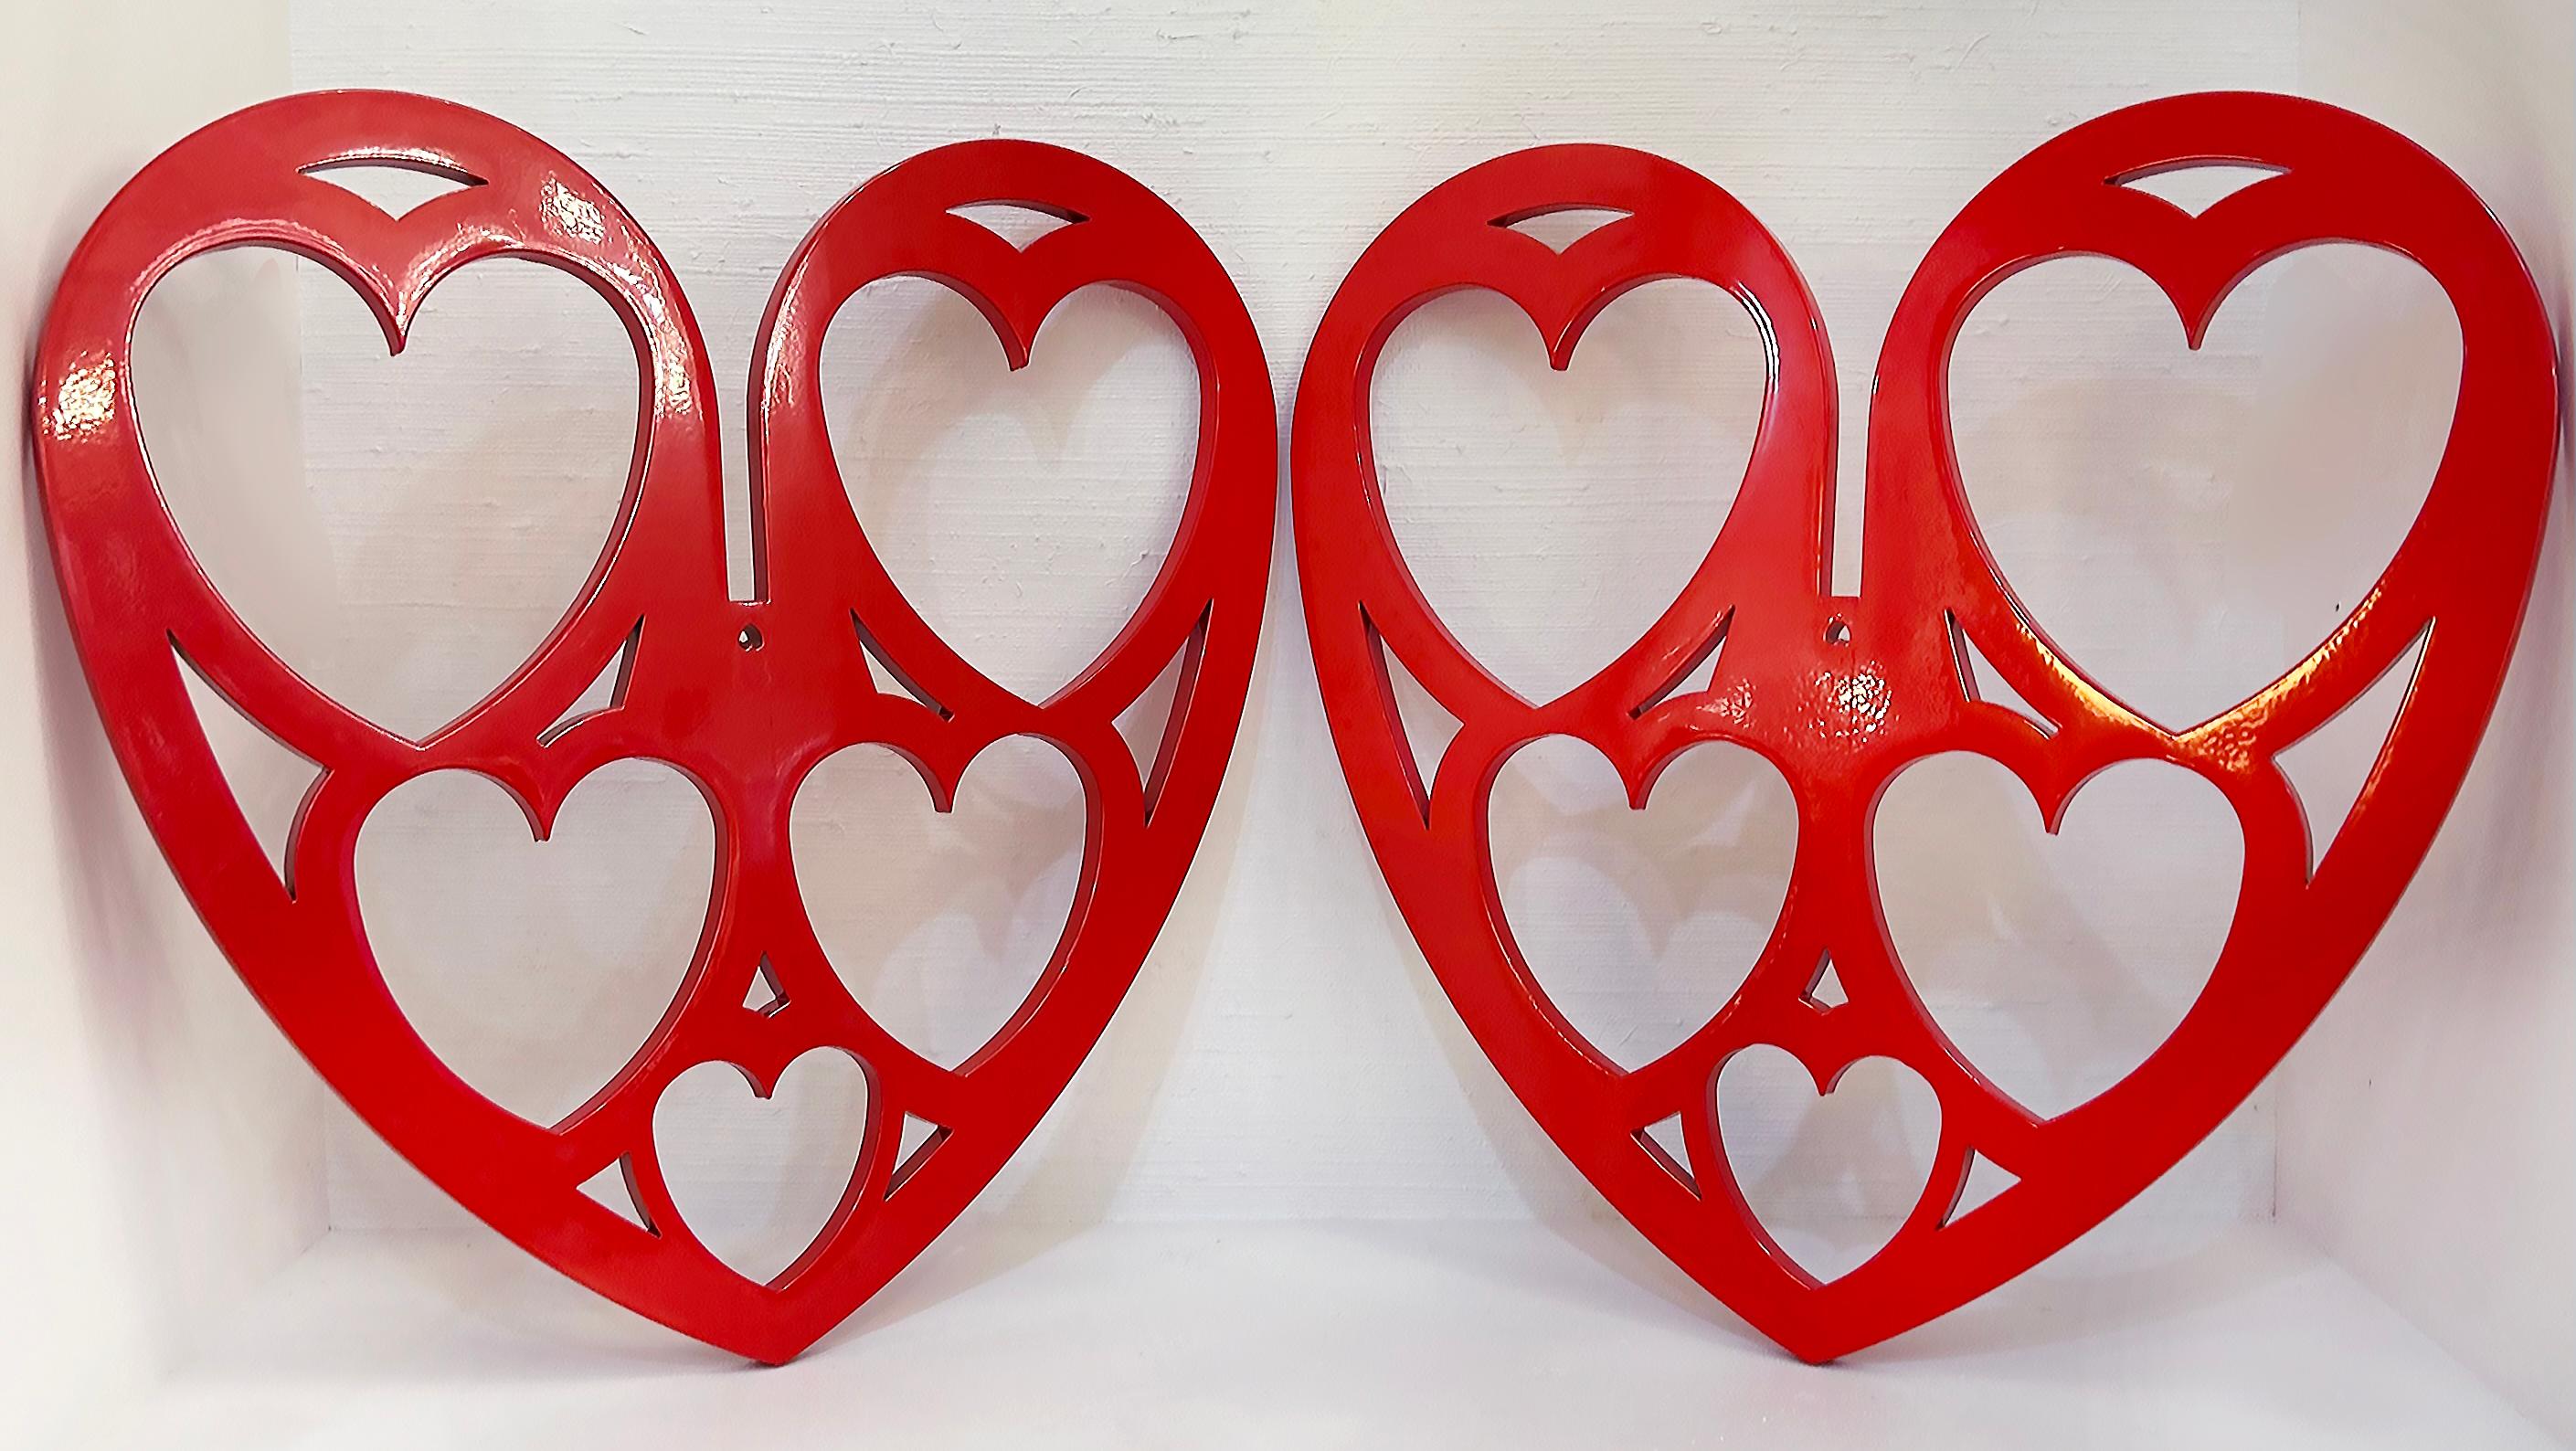 Interlocking Hearts Powder-coated Aluminum Lace Sculpture by Michael Gitter For Sale 3